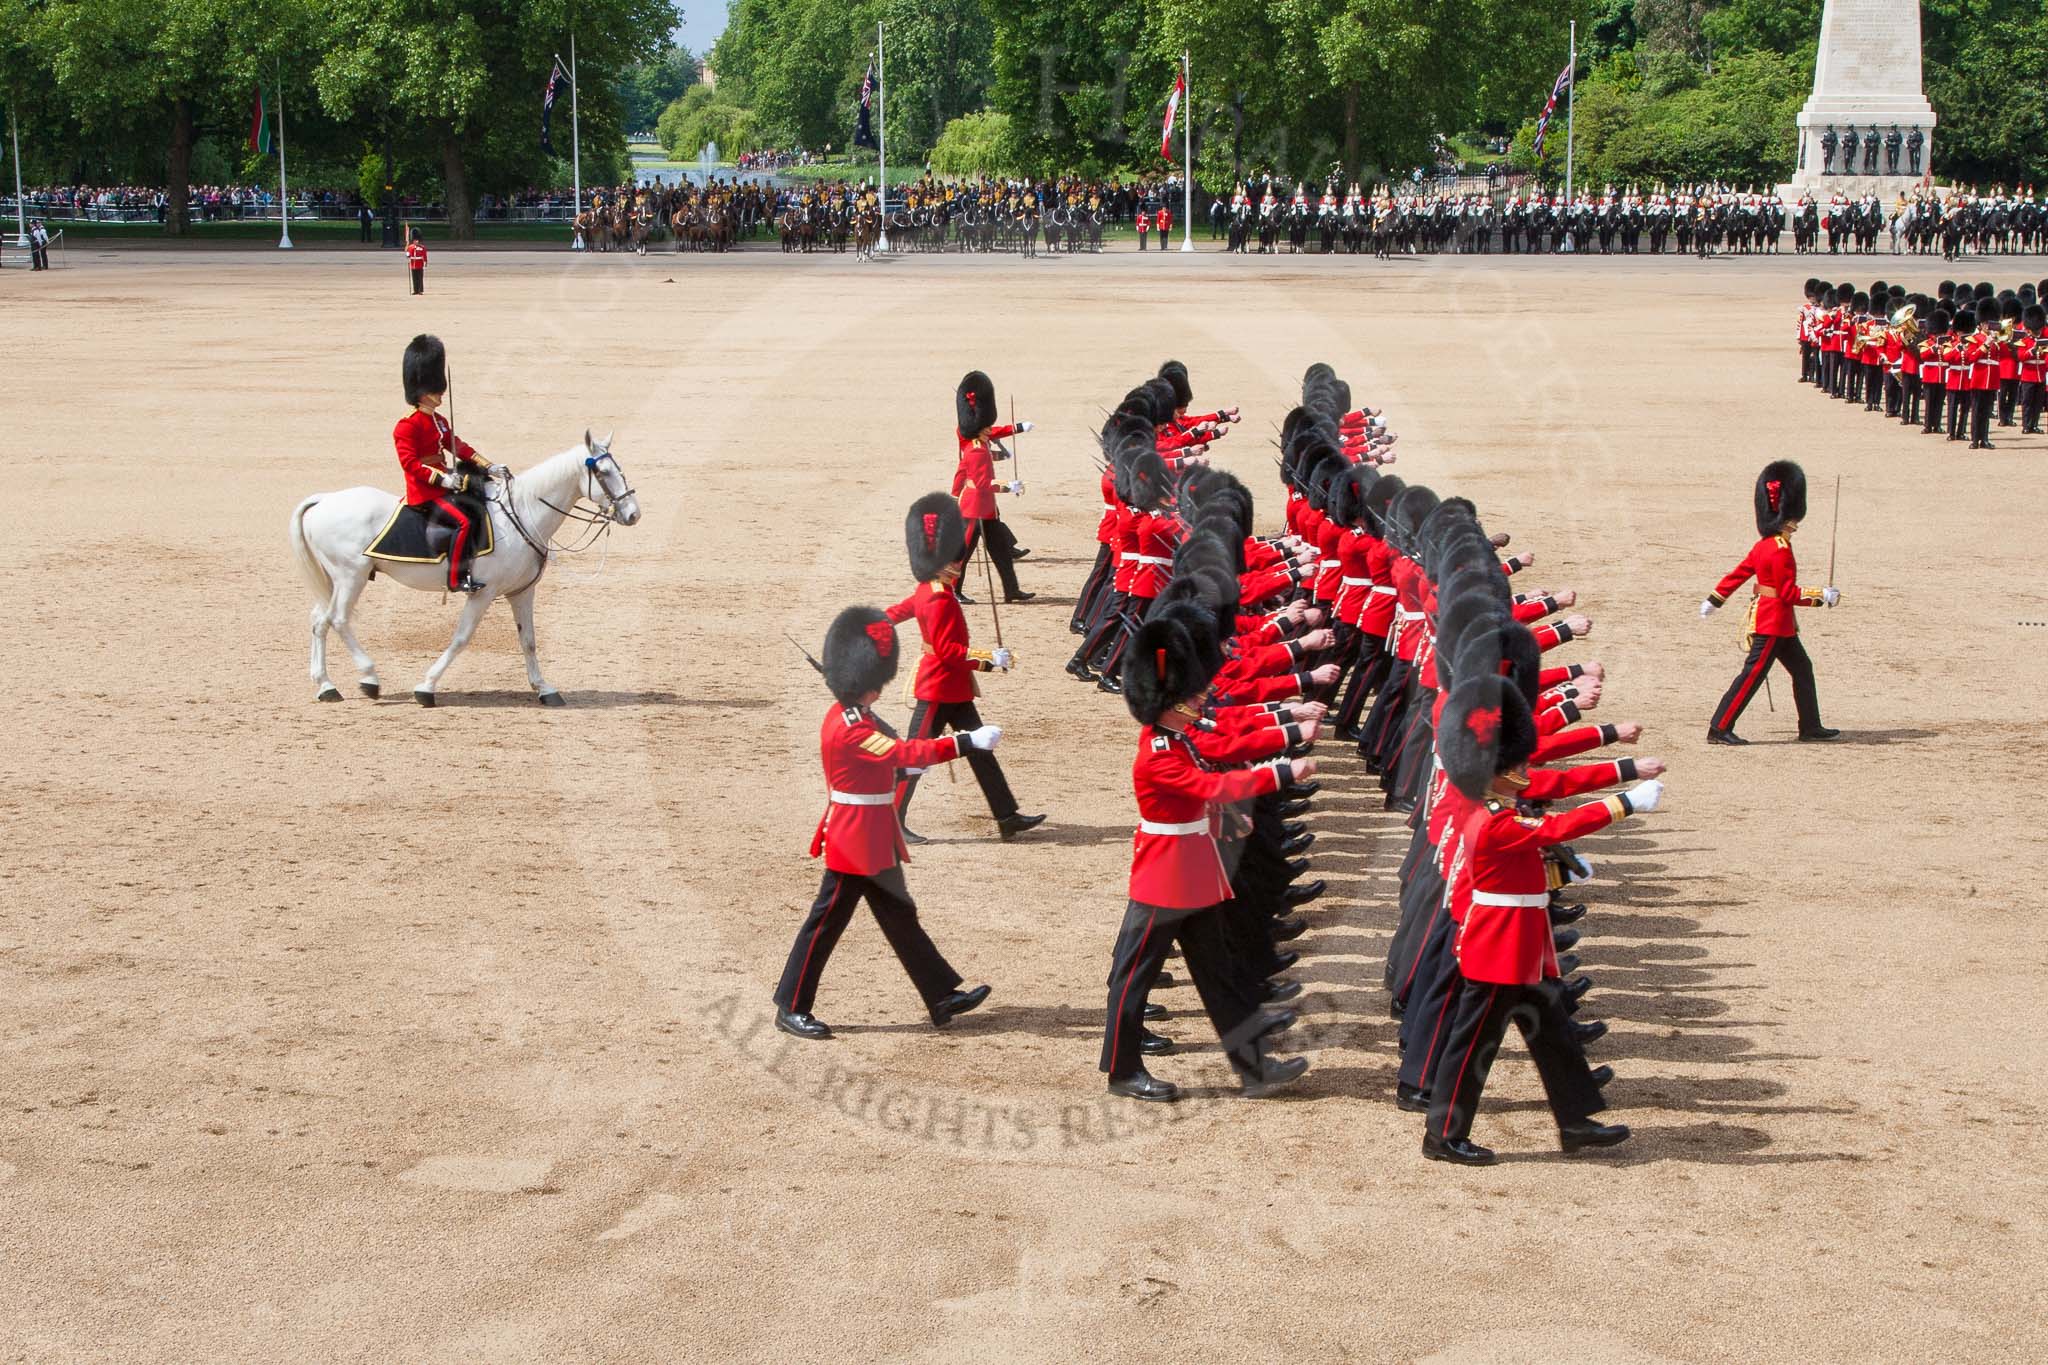 The Colonel's Review 2013: The March Past in Quick Time - Coldstream Guards..
Horse Guards Parade, Westminster,
London SW1,

United Kingdom,
on 08 June 2013 at 11:44, image #697